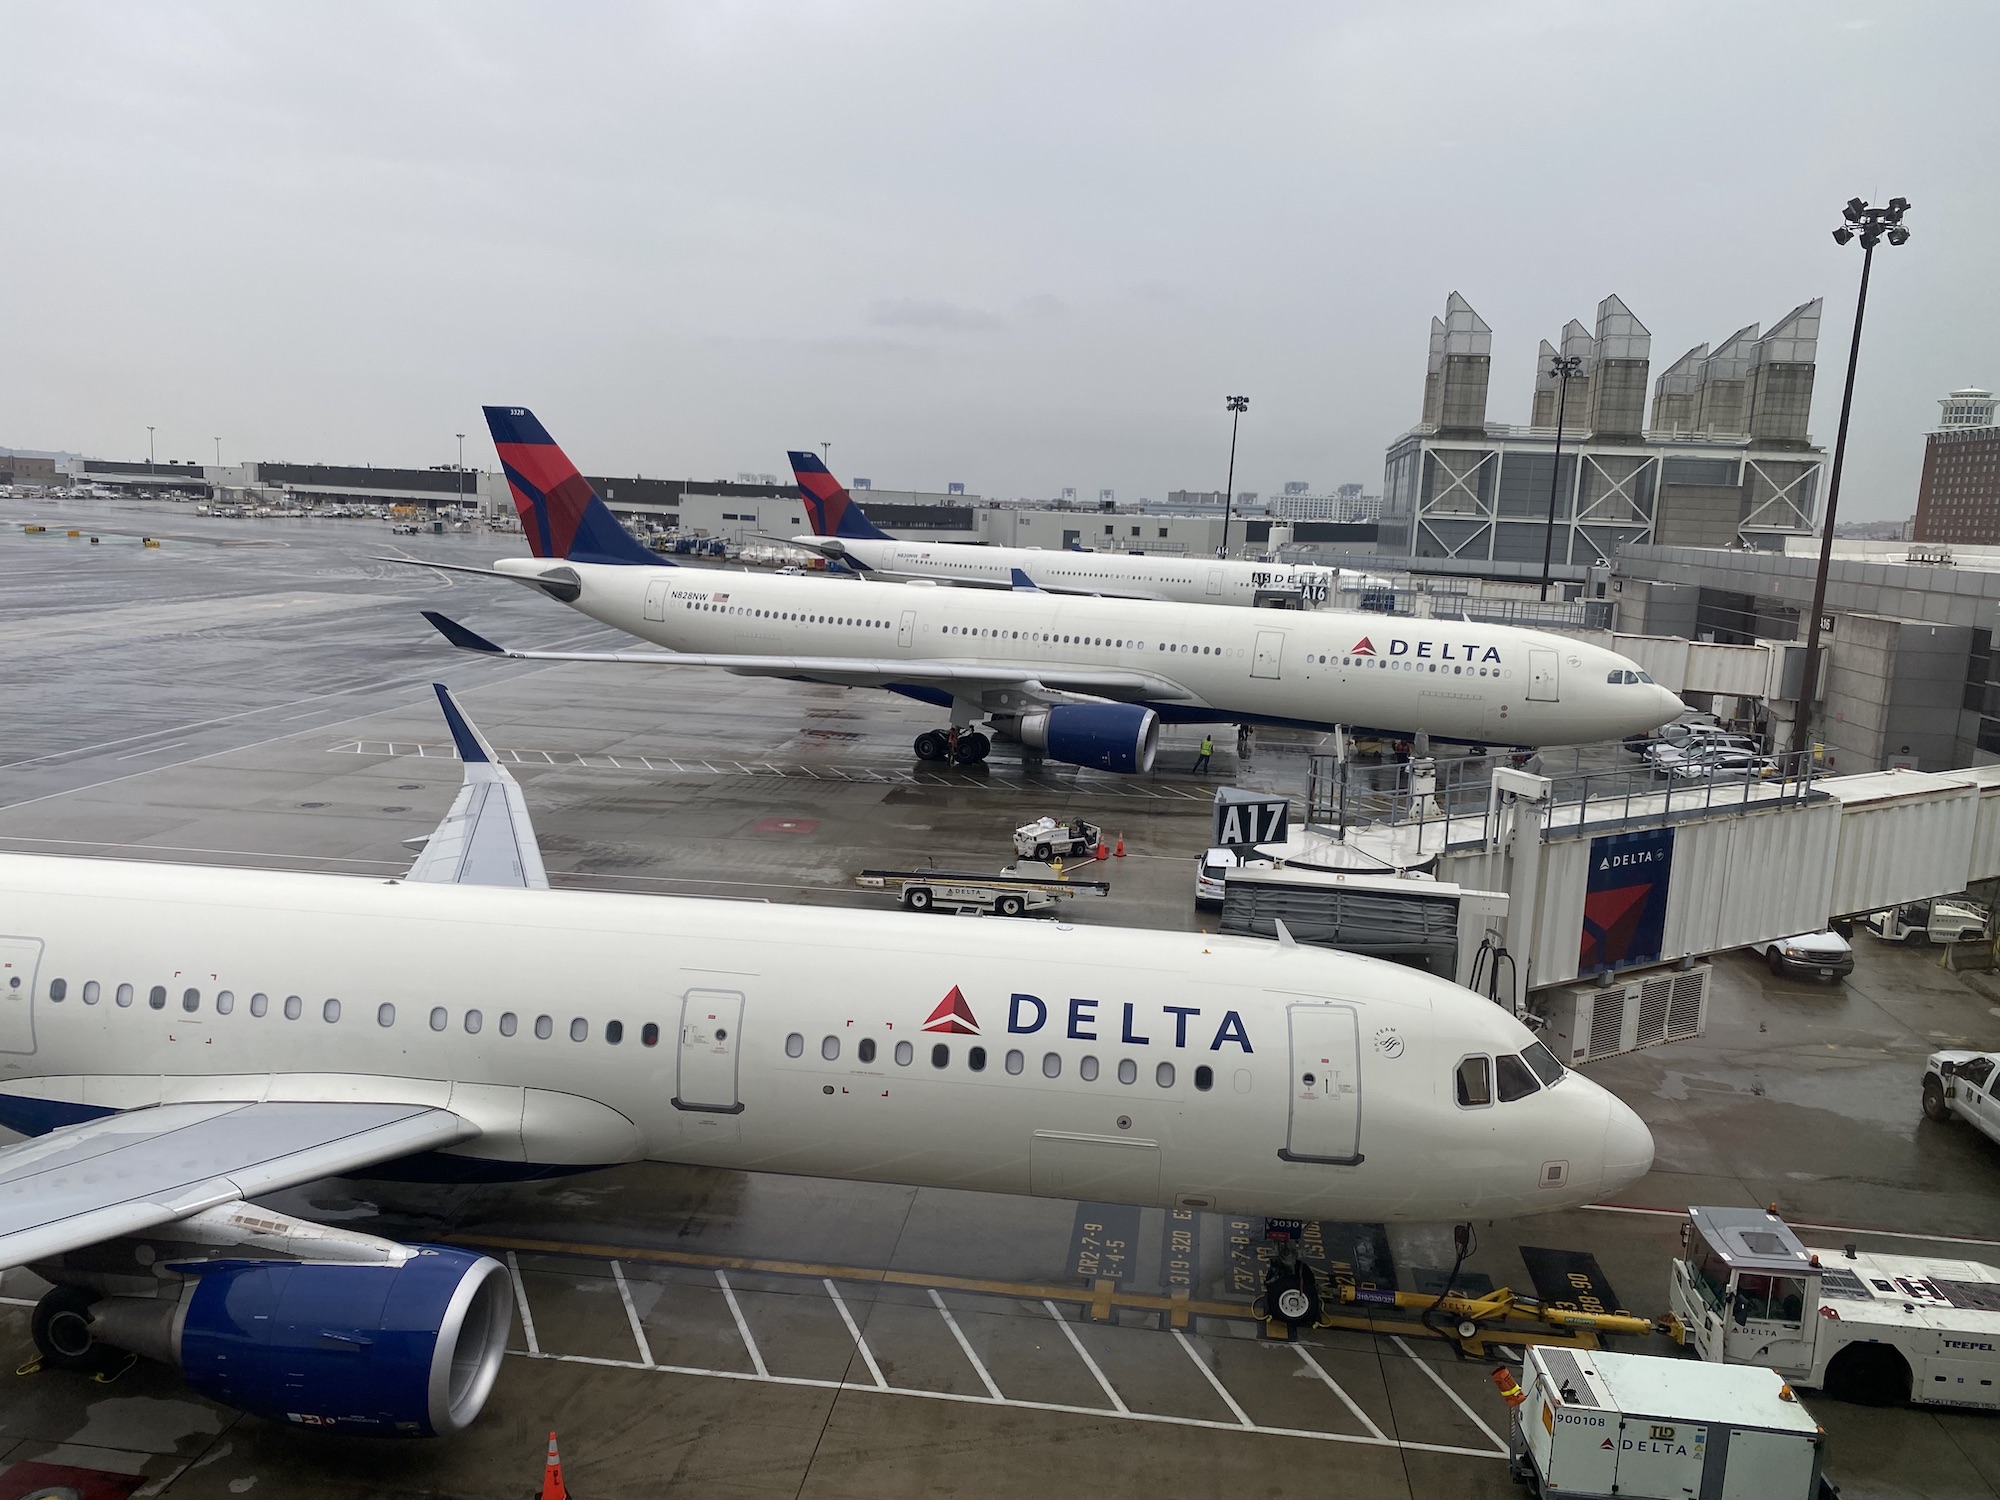 Some nice but not so America Delta planes